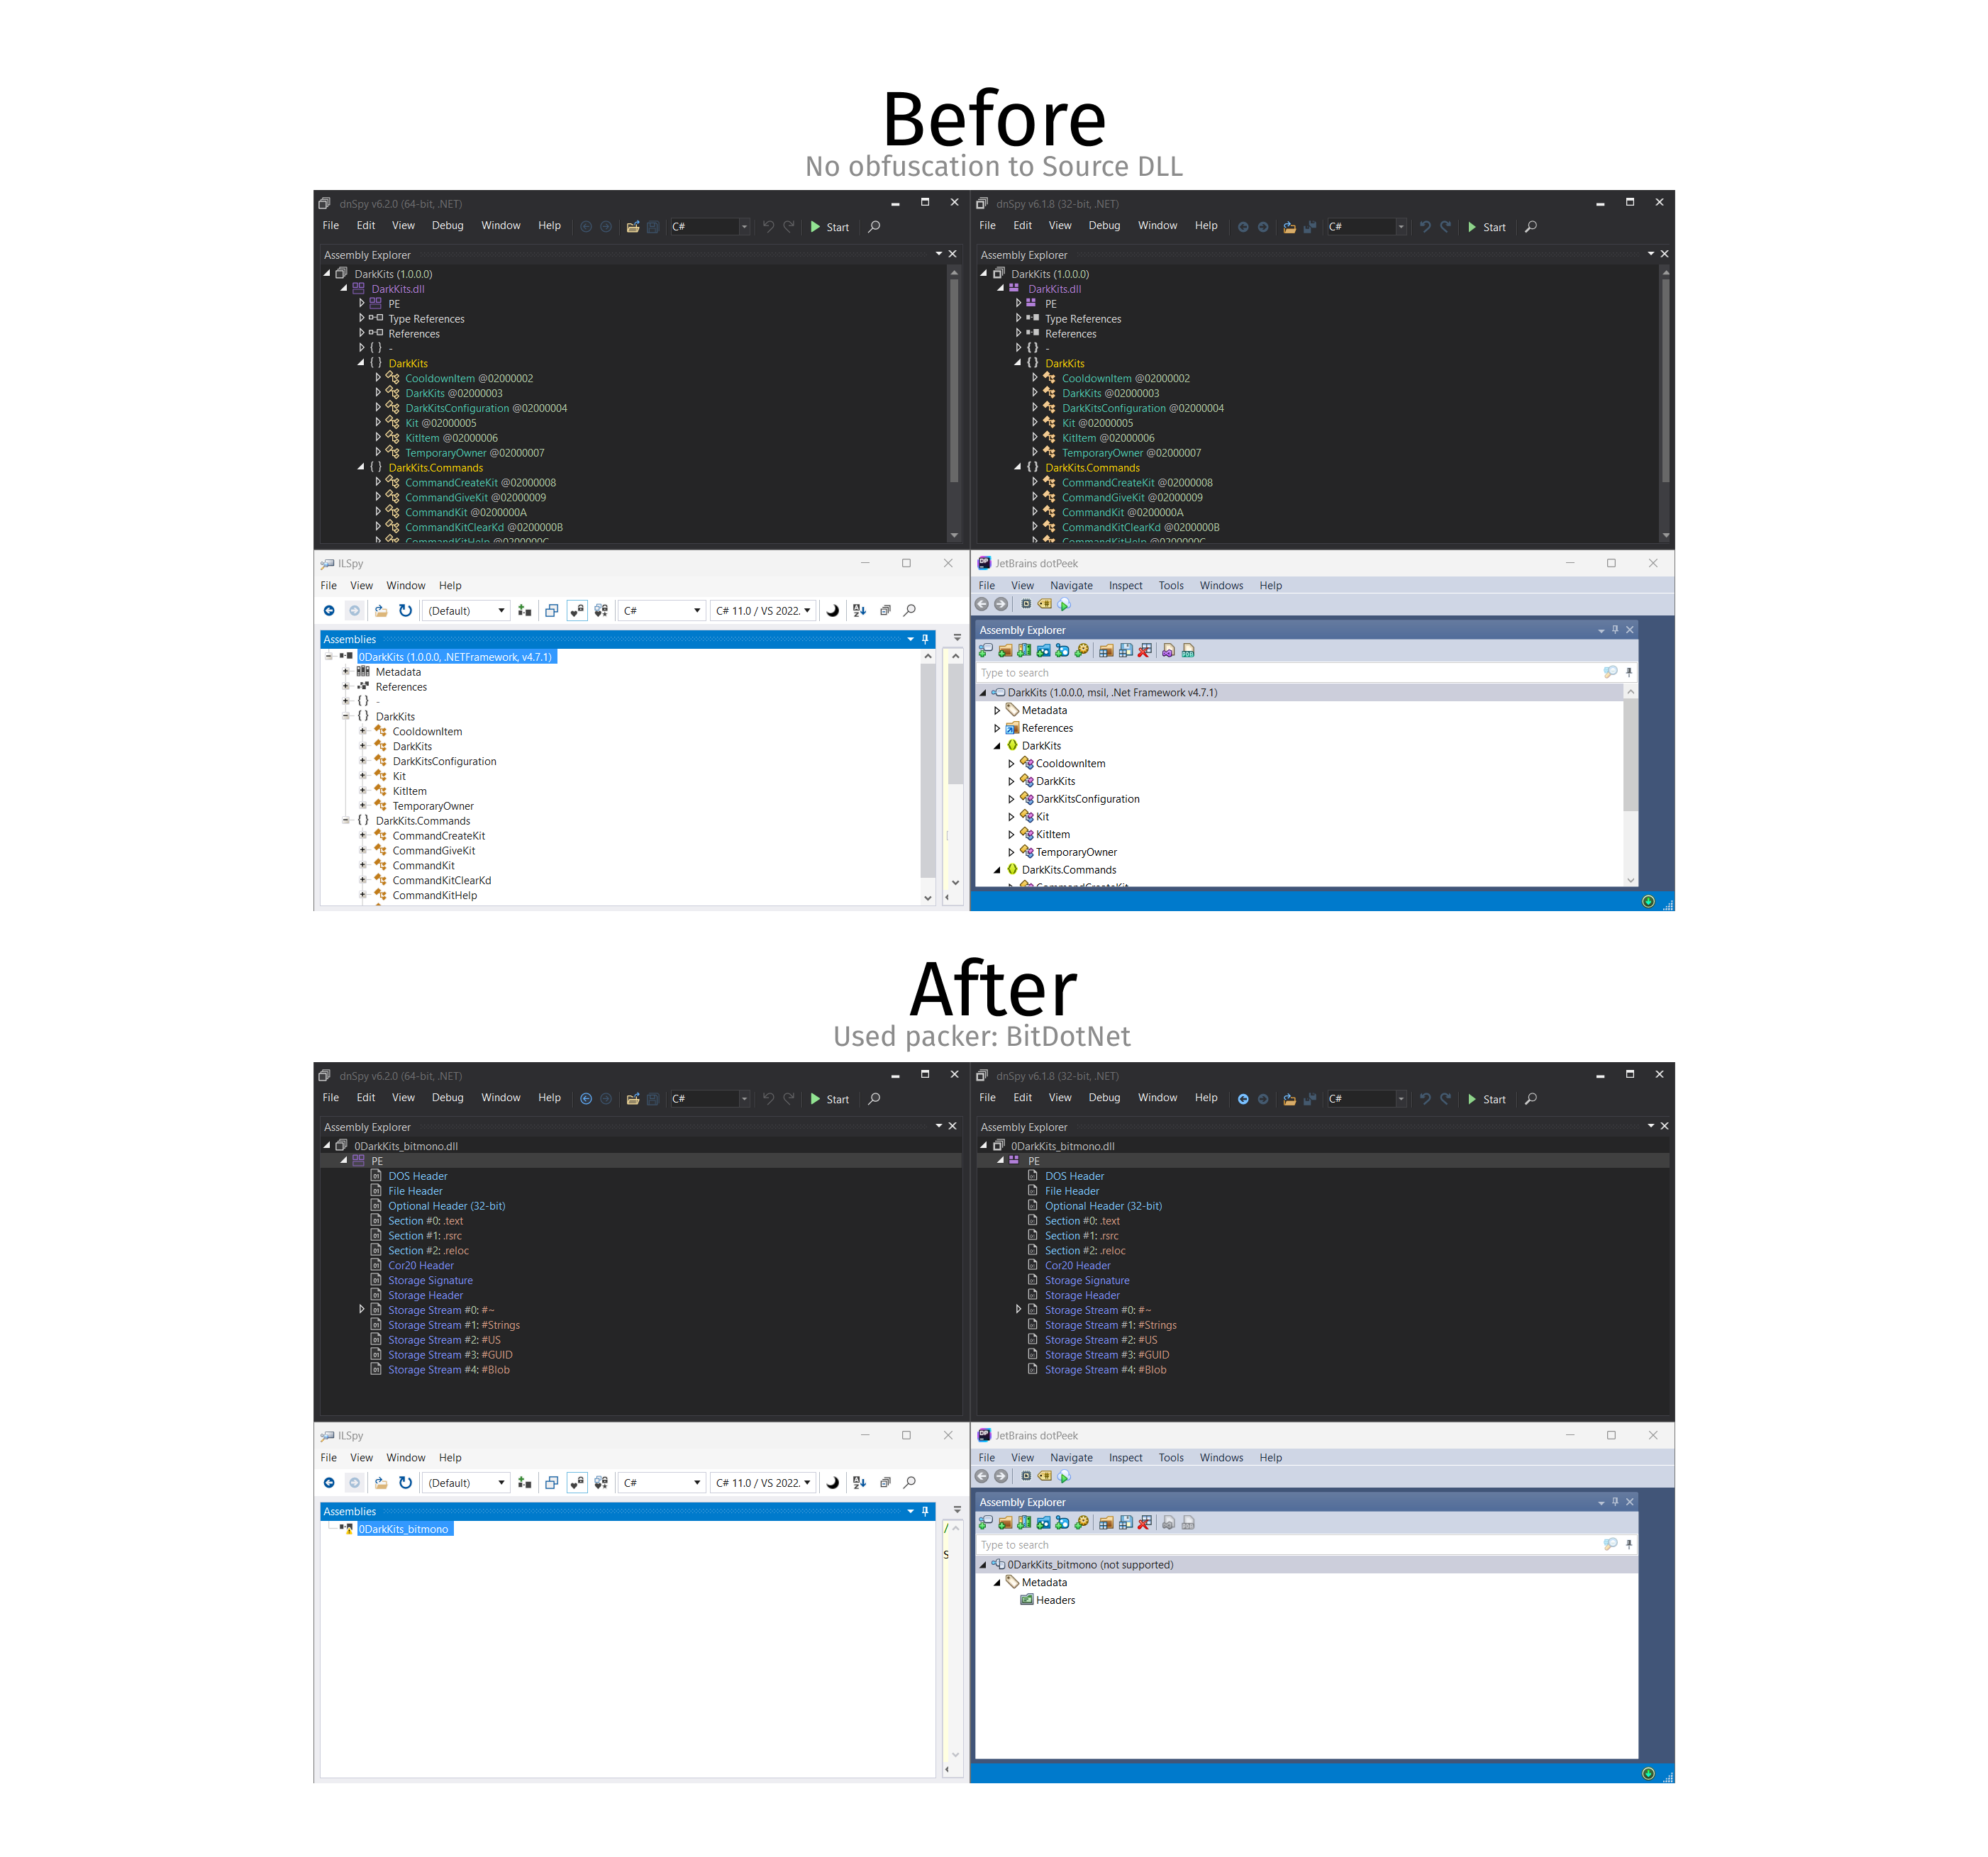 Before and after obfuscation preview by BitMono